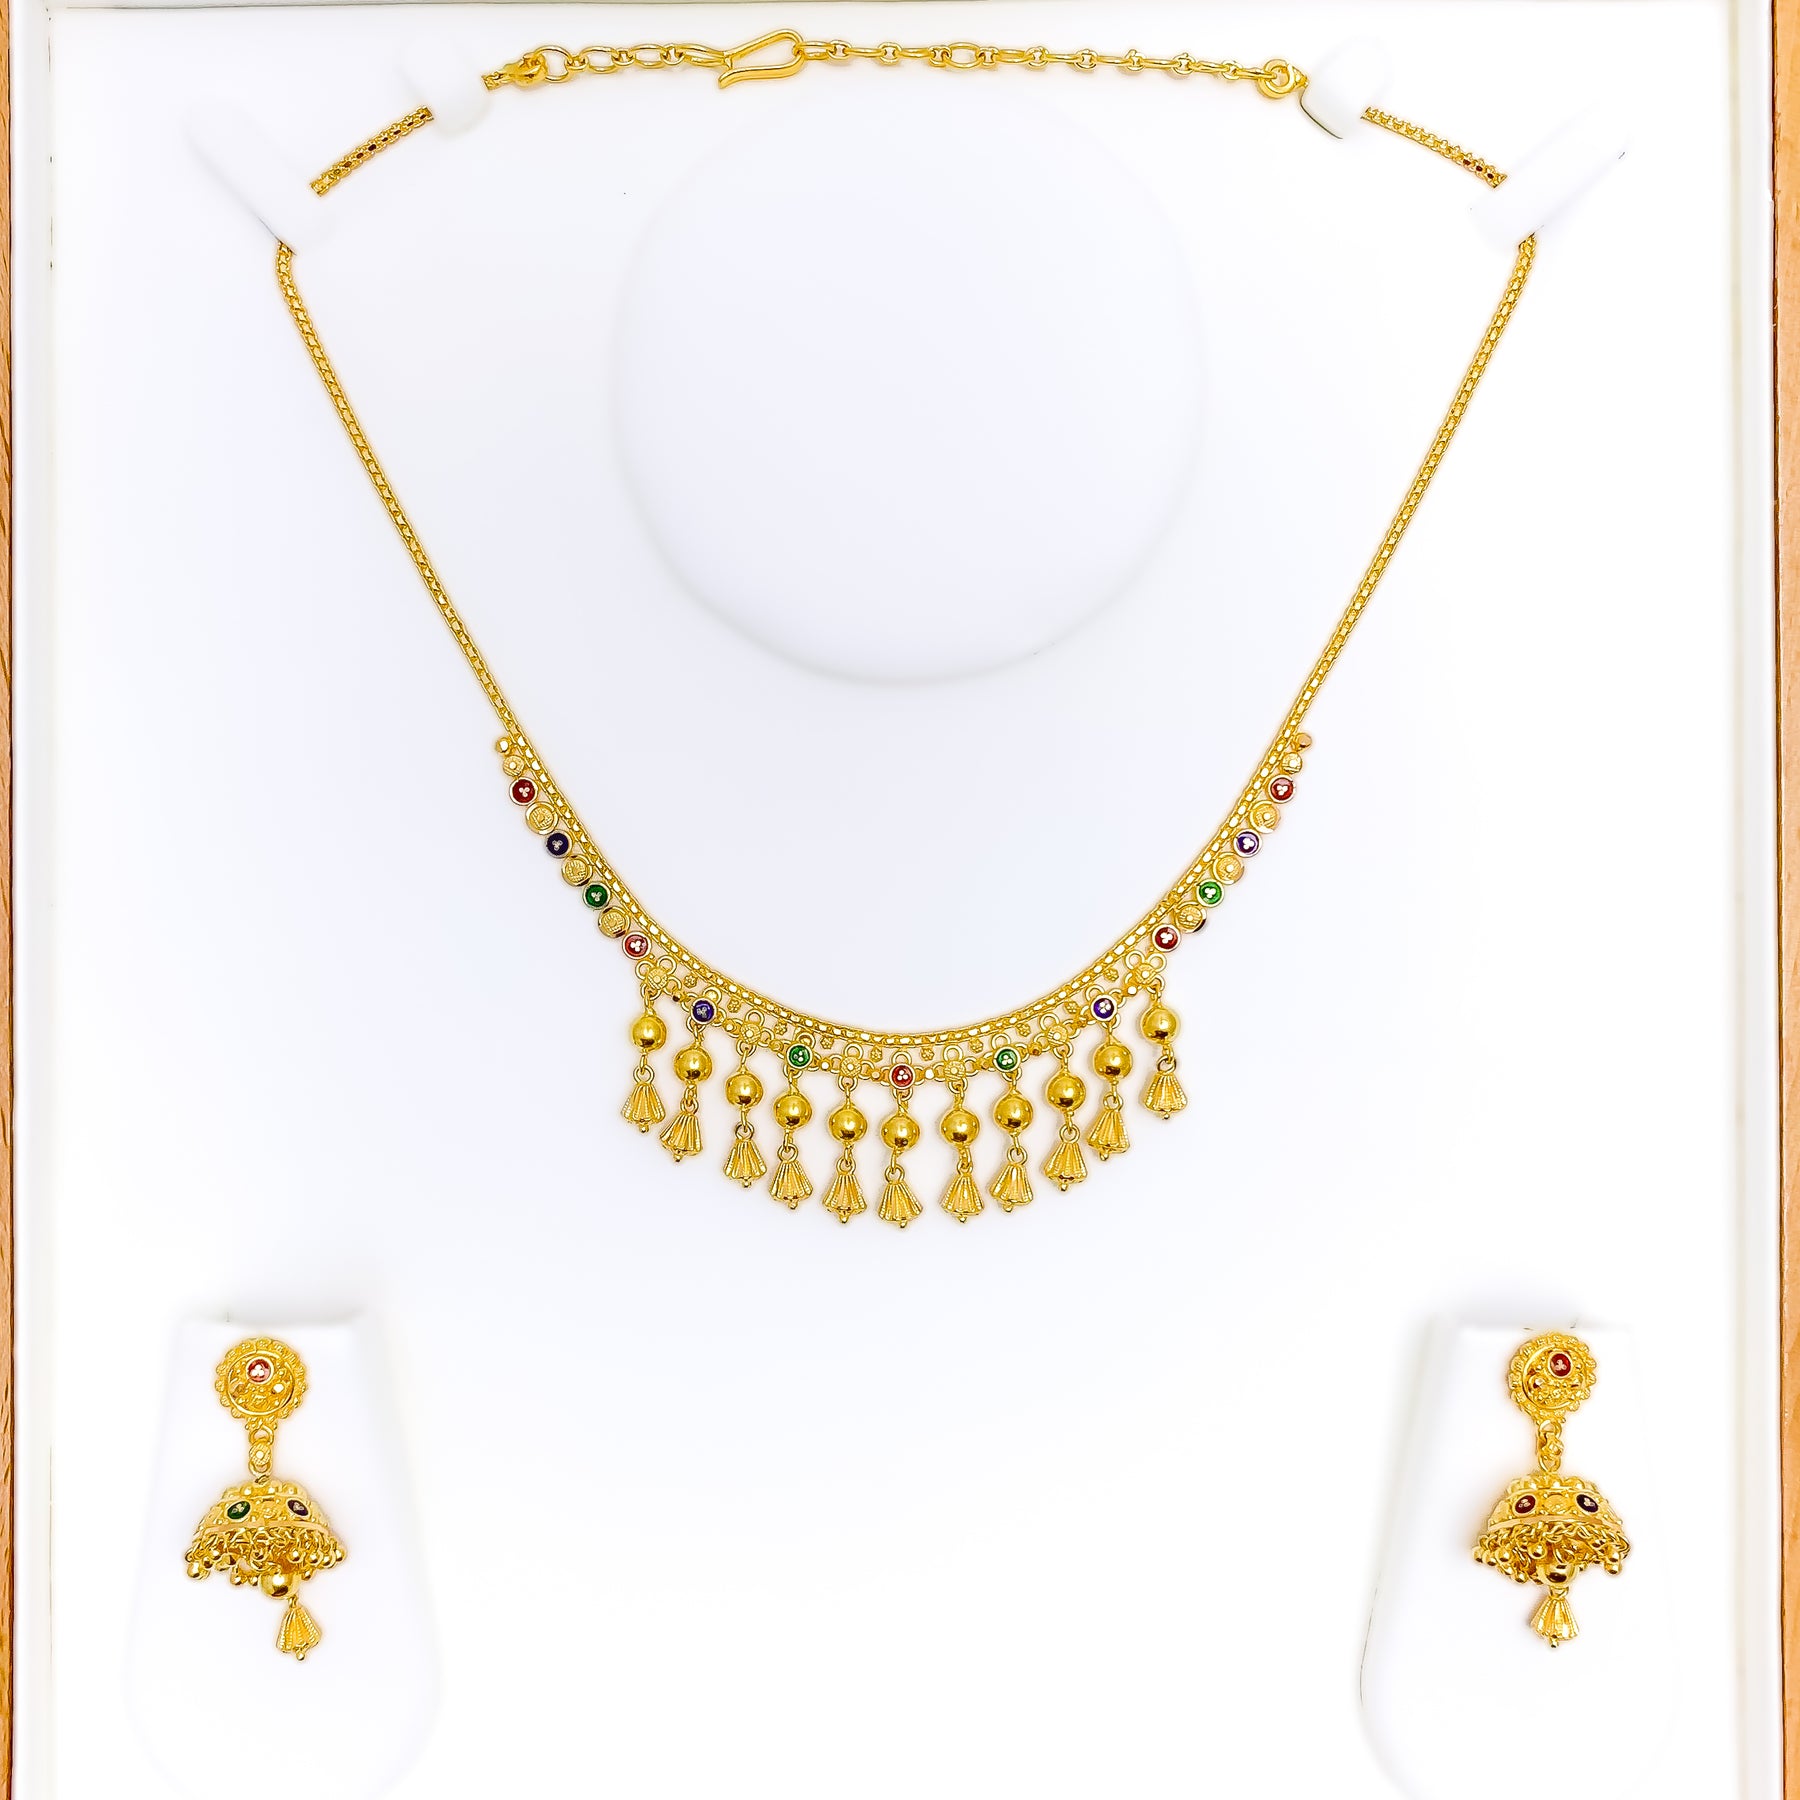 New 24K Gold Plated Jewelry Set Women's Tassel Necklace Earrings as a  Beautiful Gift for Girls YY10112